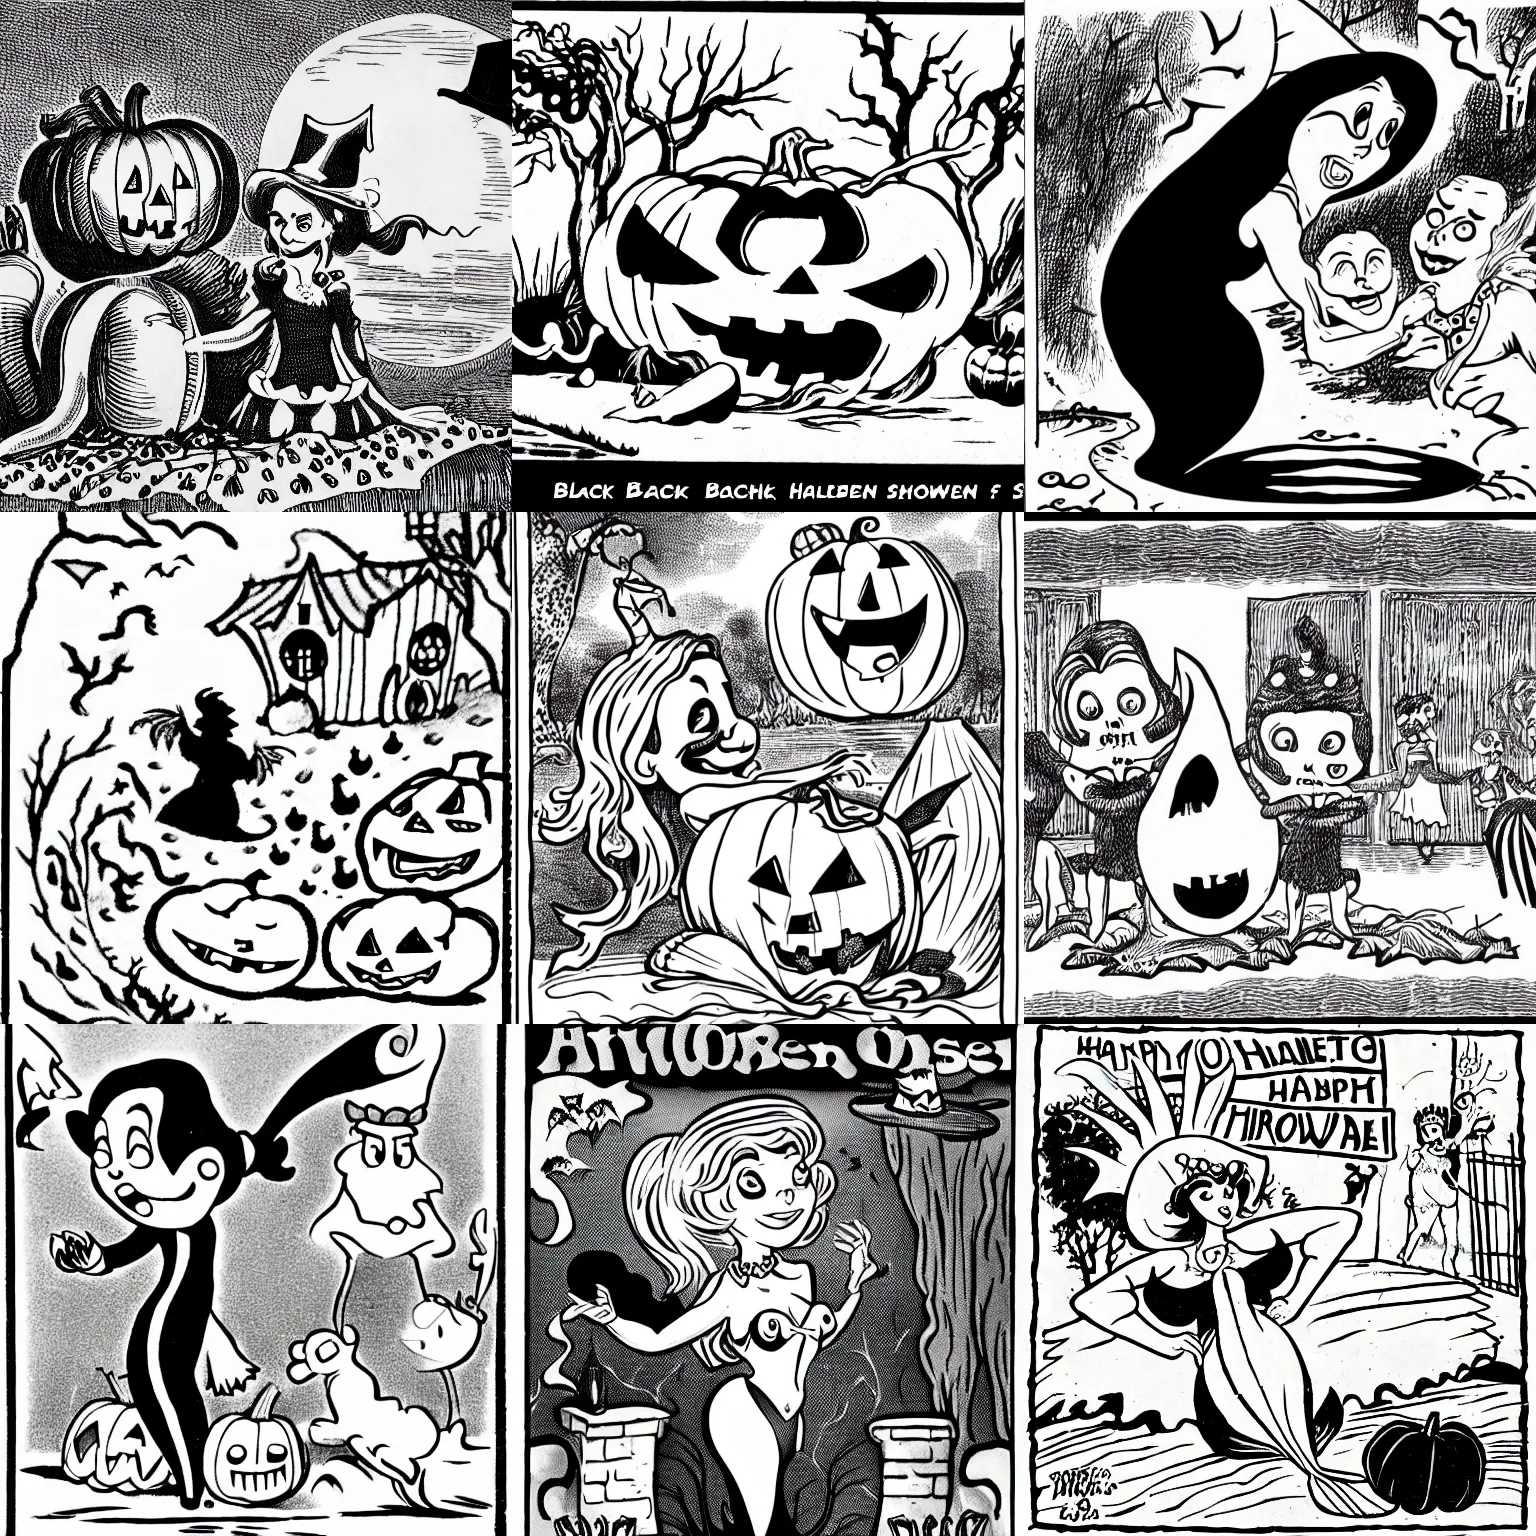 Prompt: black and white Halloween episode of a rubber hose cartoon about a mermaid